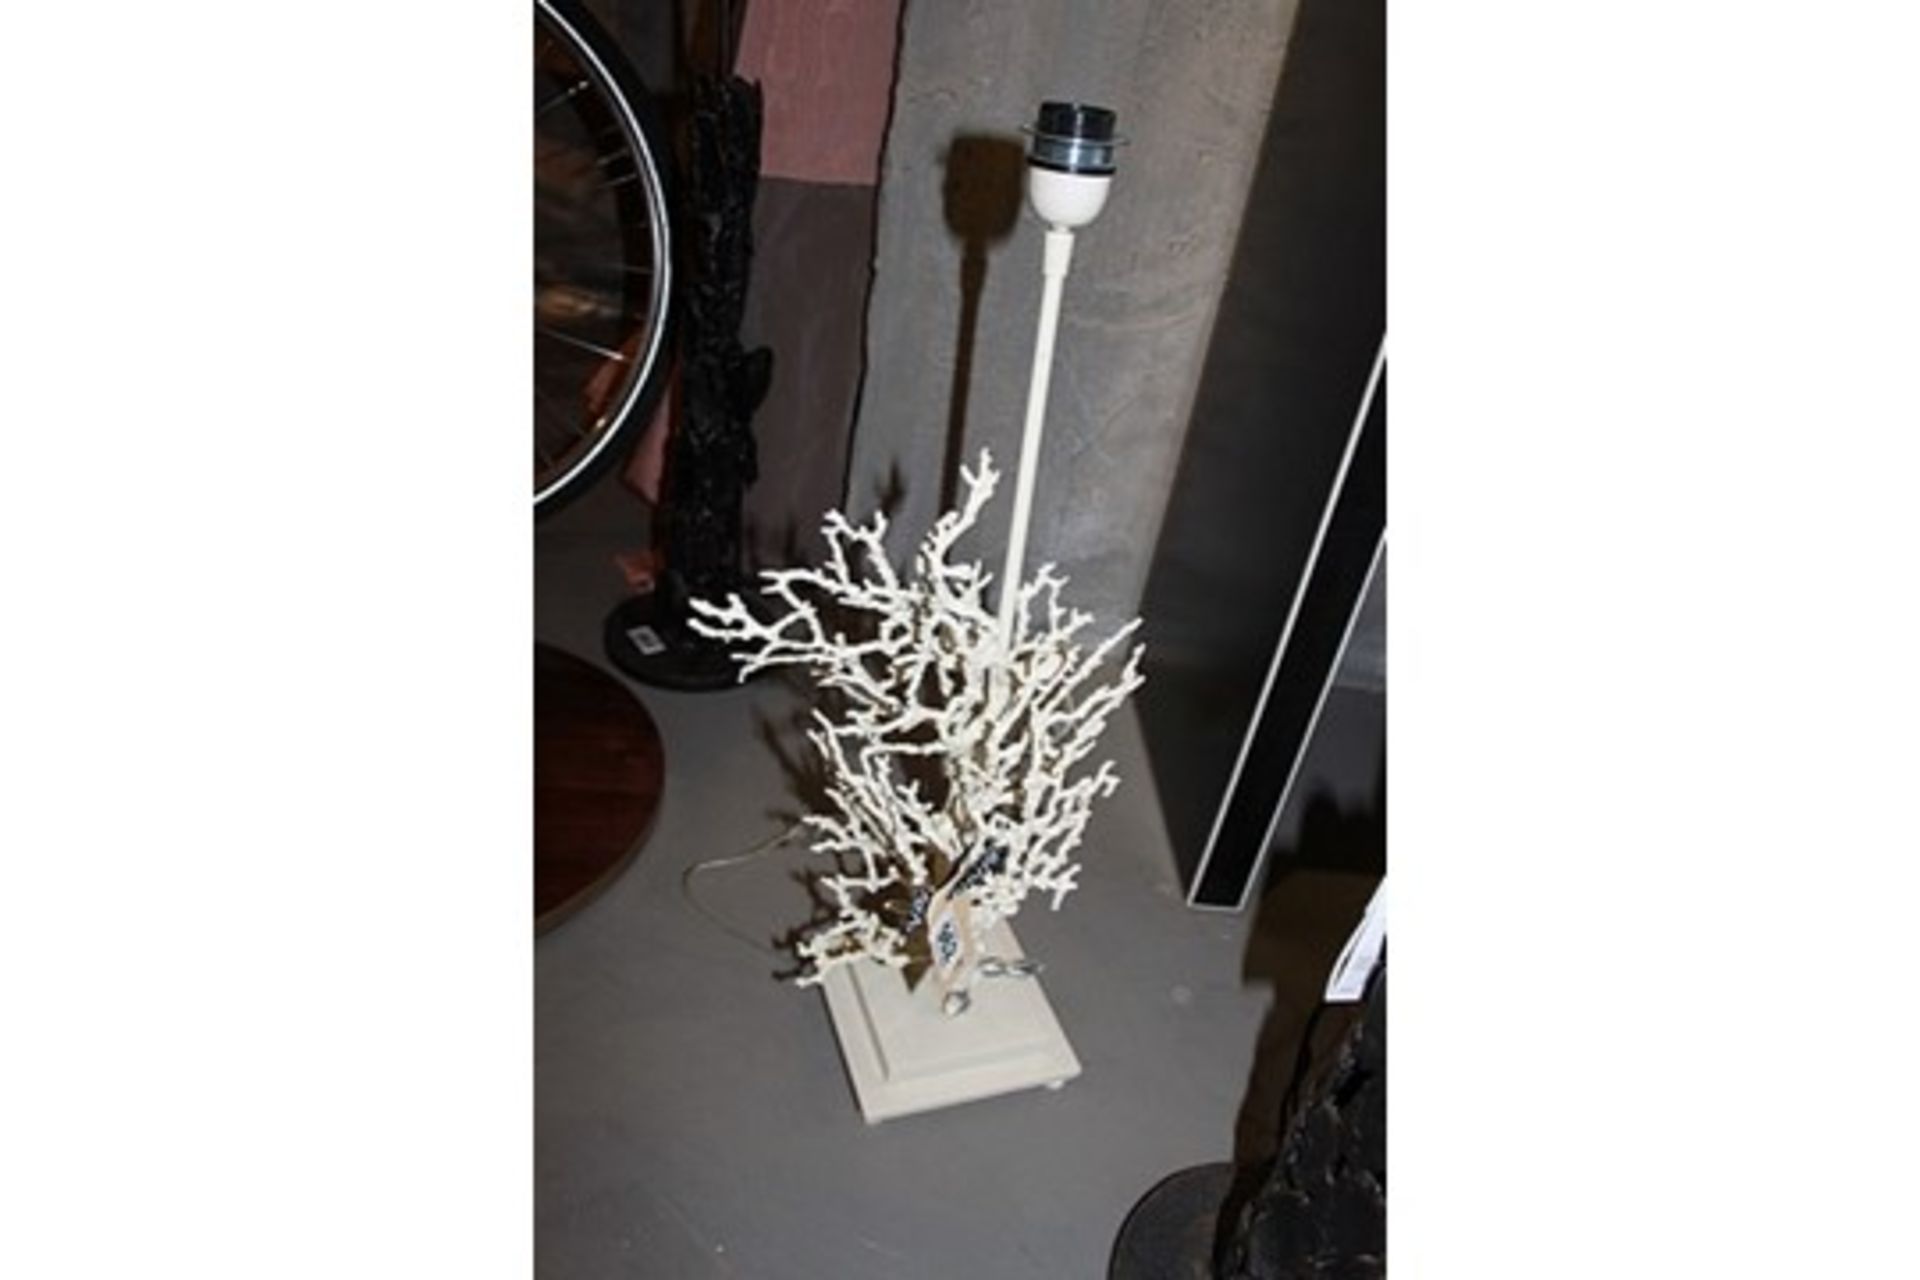 Table Lamp Coral Stand Displays A Decoratively Ornate Cluster Of Fine Coral Wrapped Around The